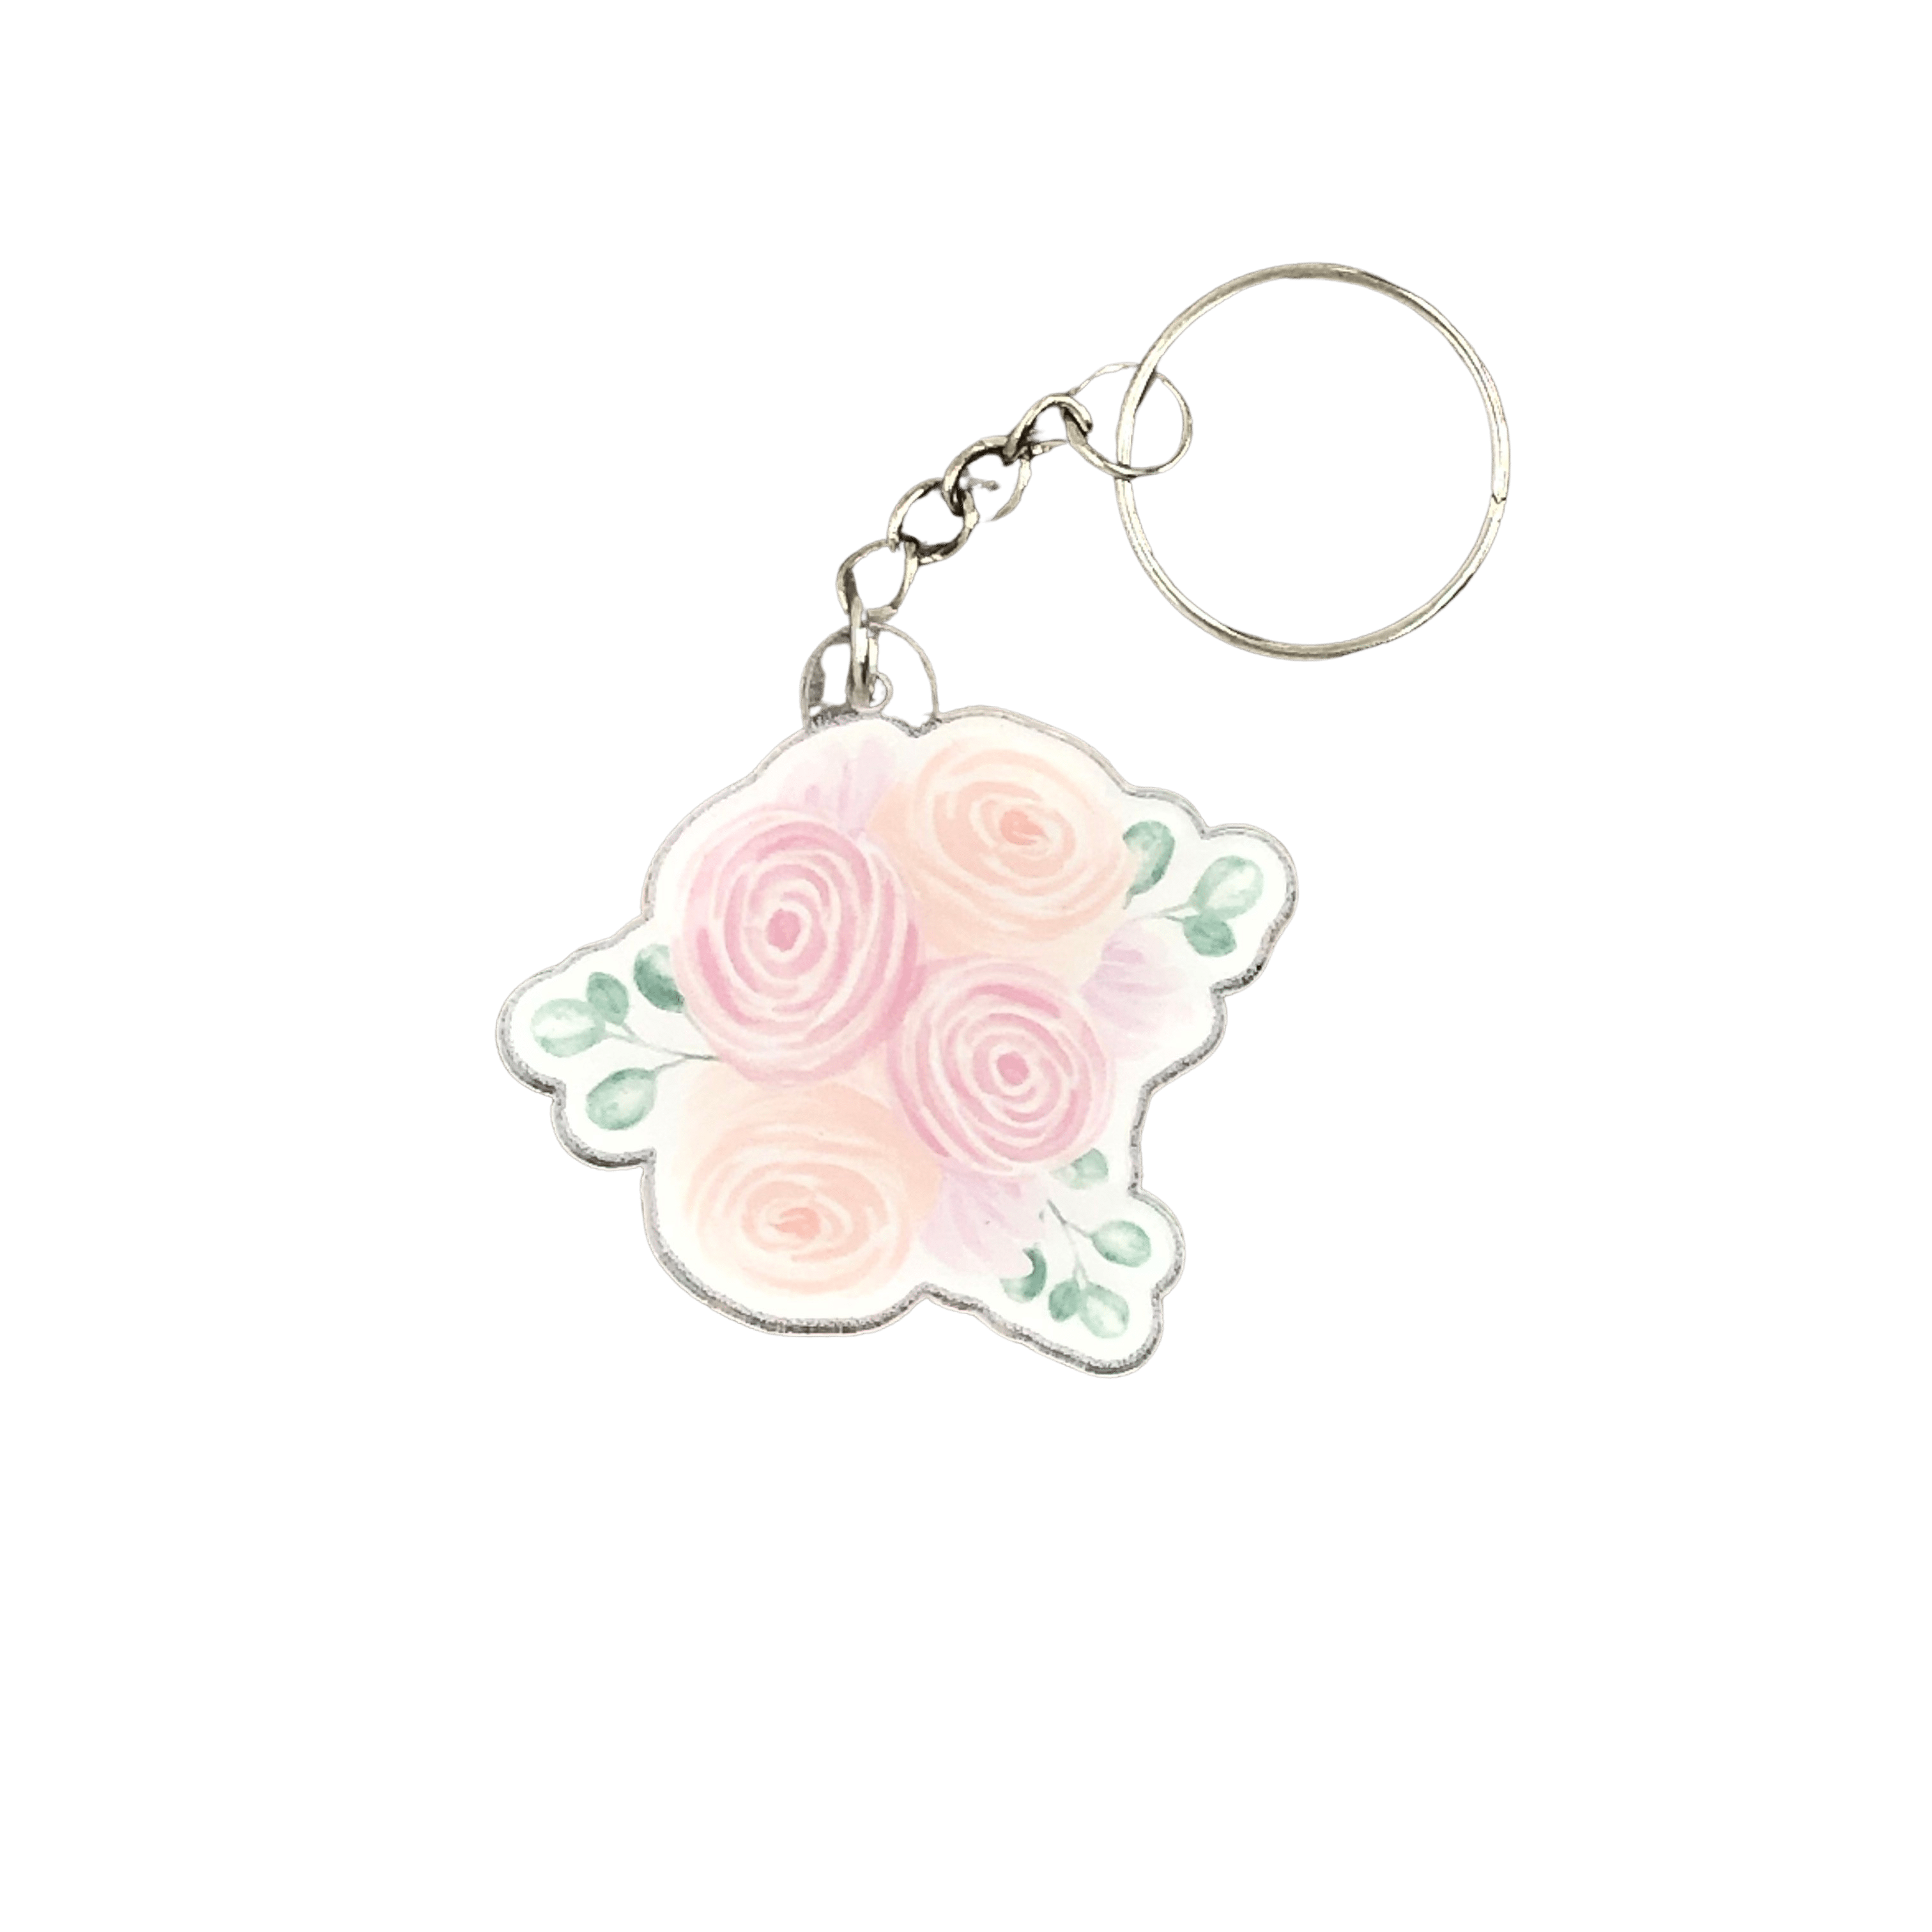 Watercolor Rose Keychain